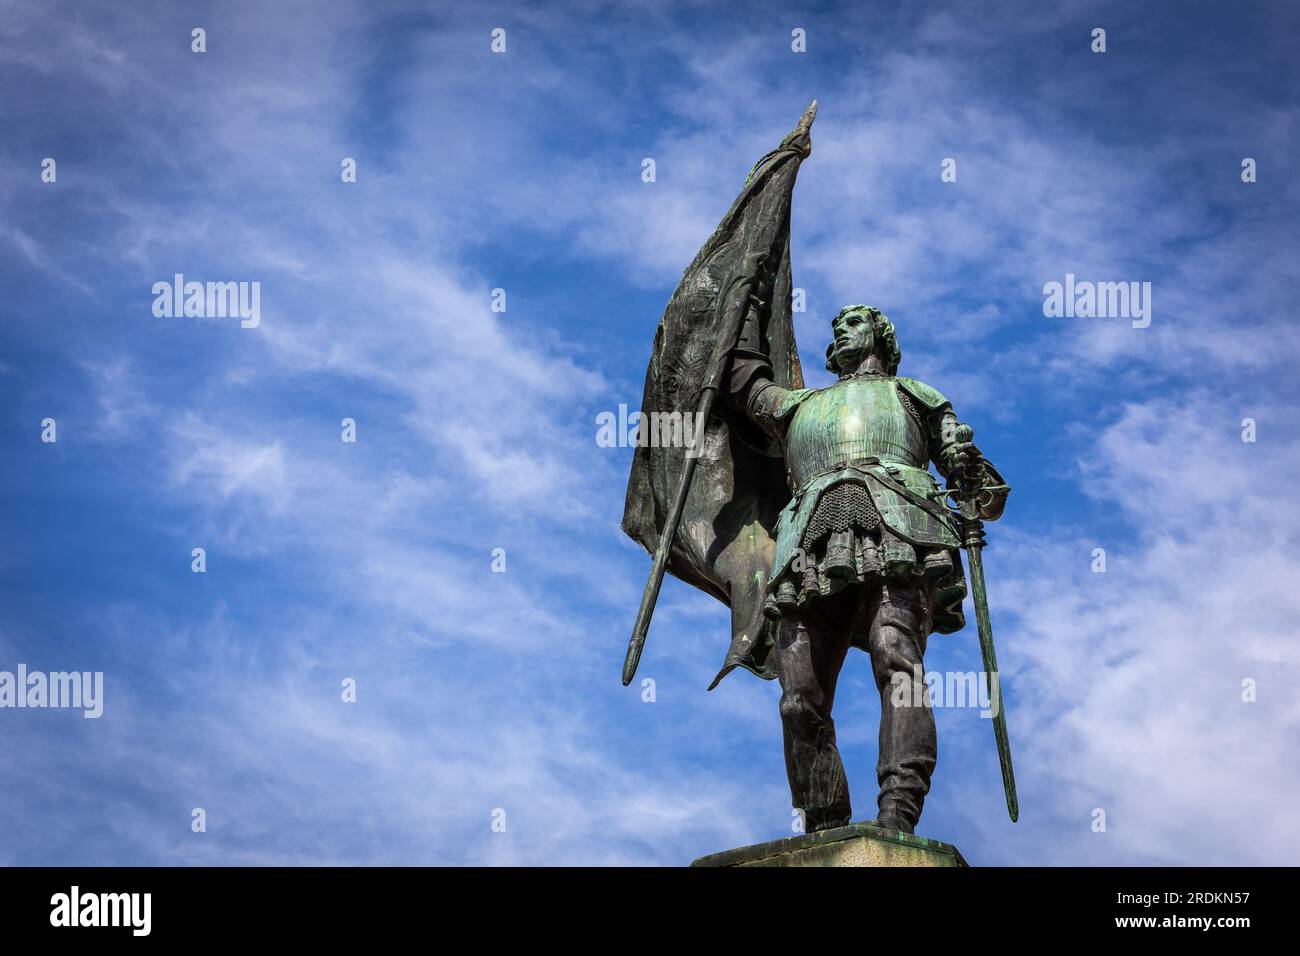 Segovia, Spain, 3.10.21. Monument to Juan Bravo, leader of the rebel Comuneros, standing in full armour, holding a flag in his right hand. Stock Photo